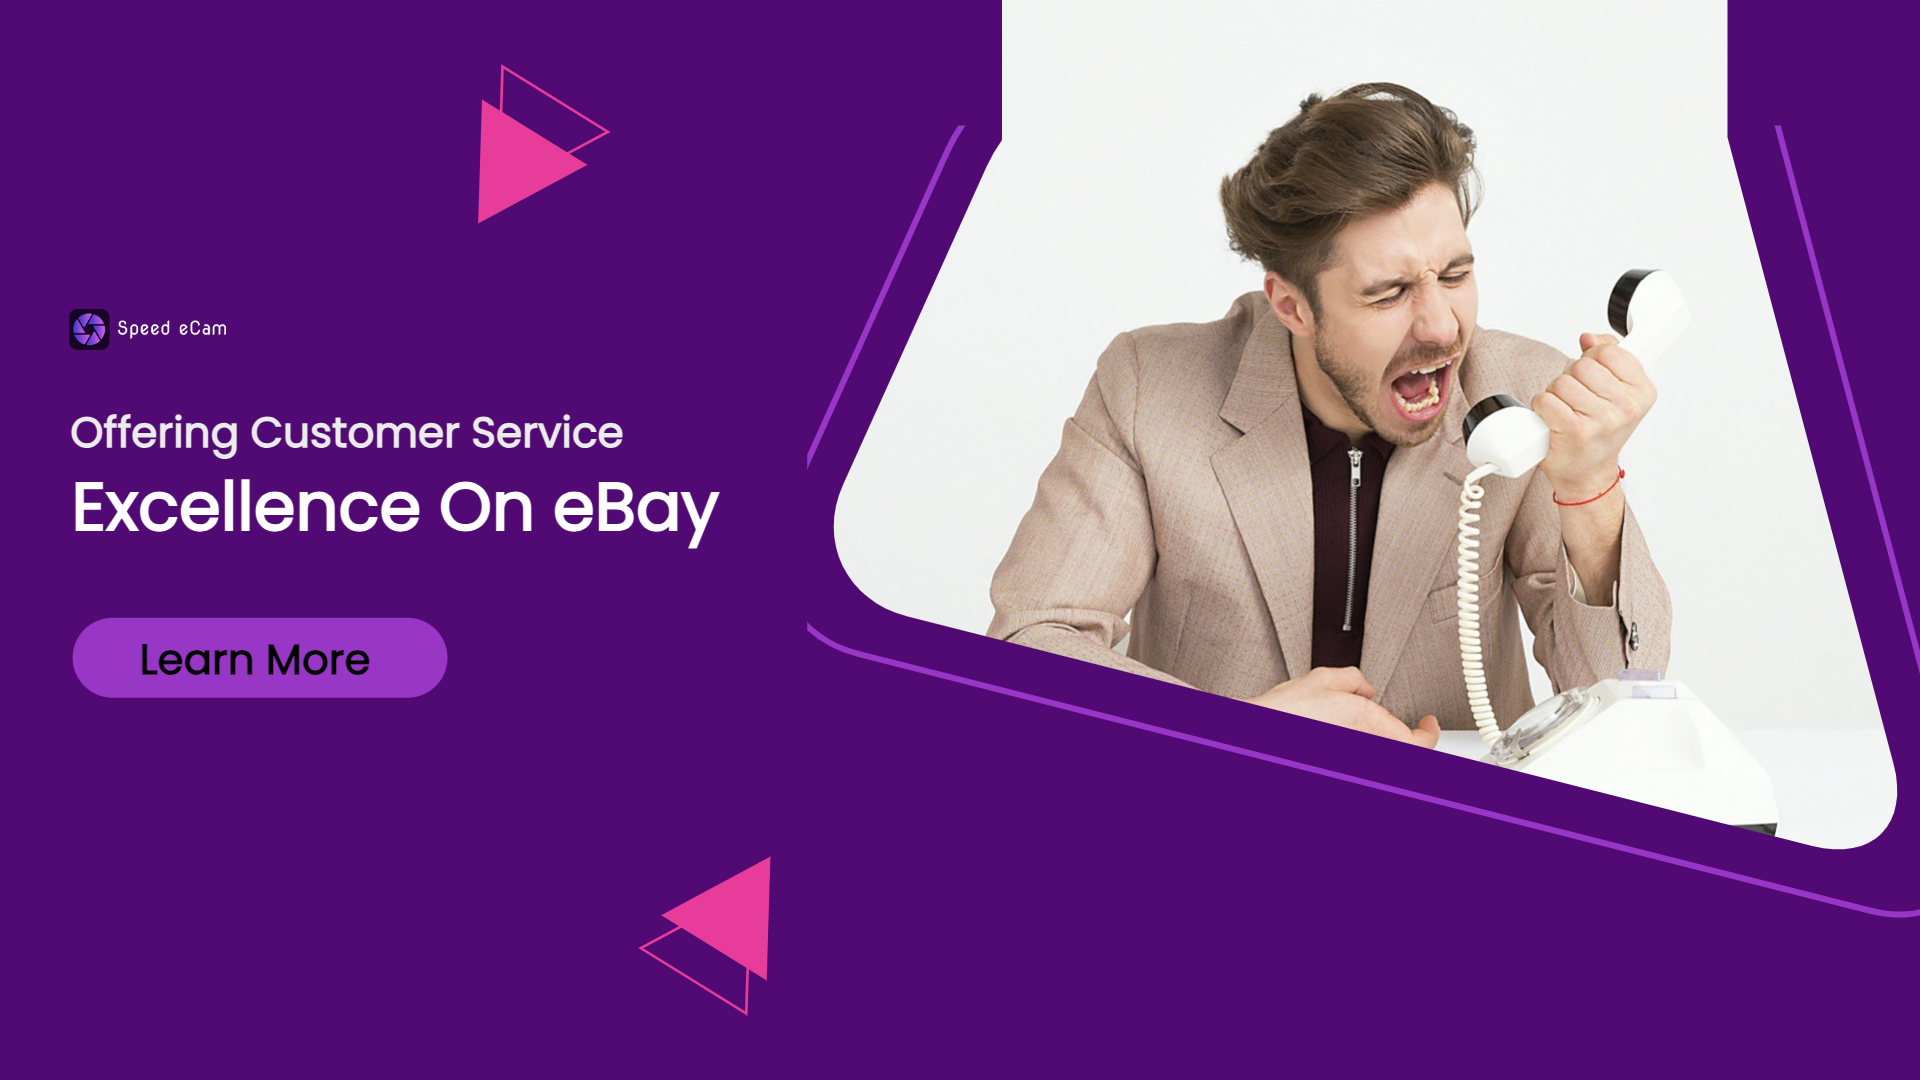 Offering Customer Service Excellence on eBay